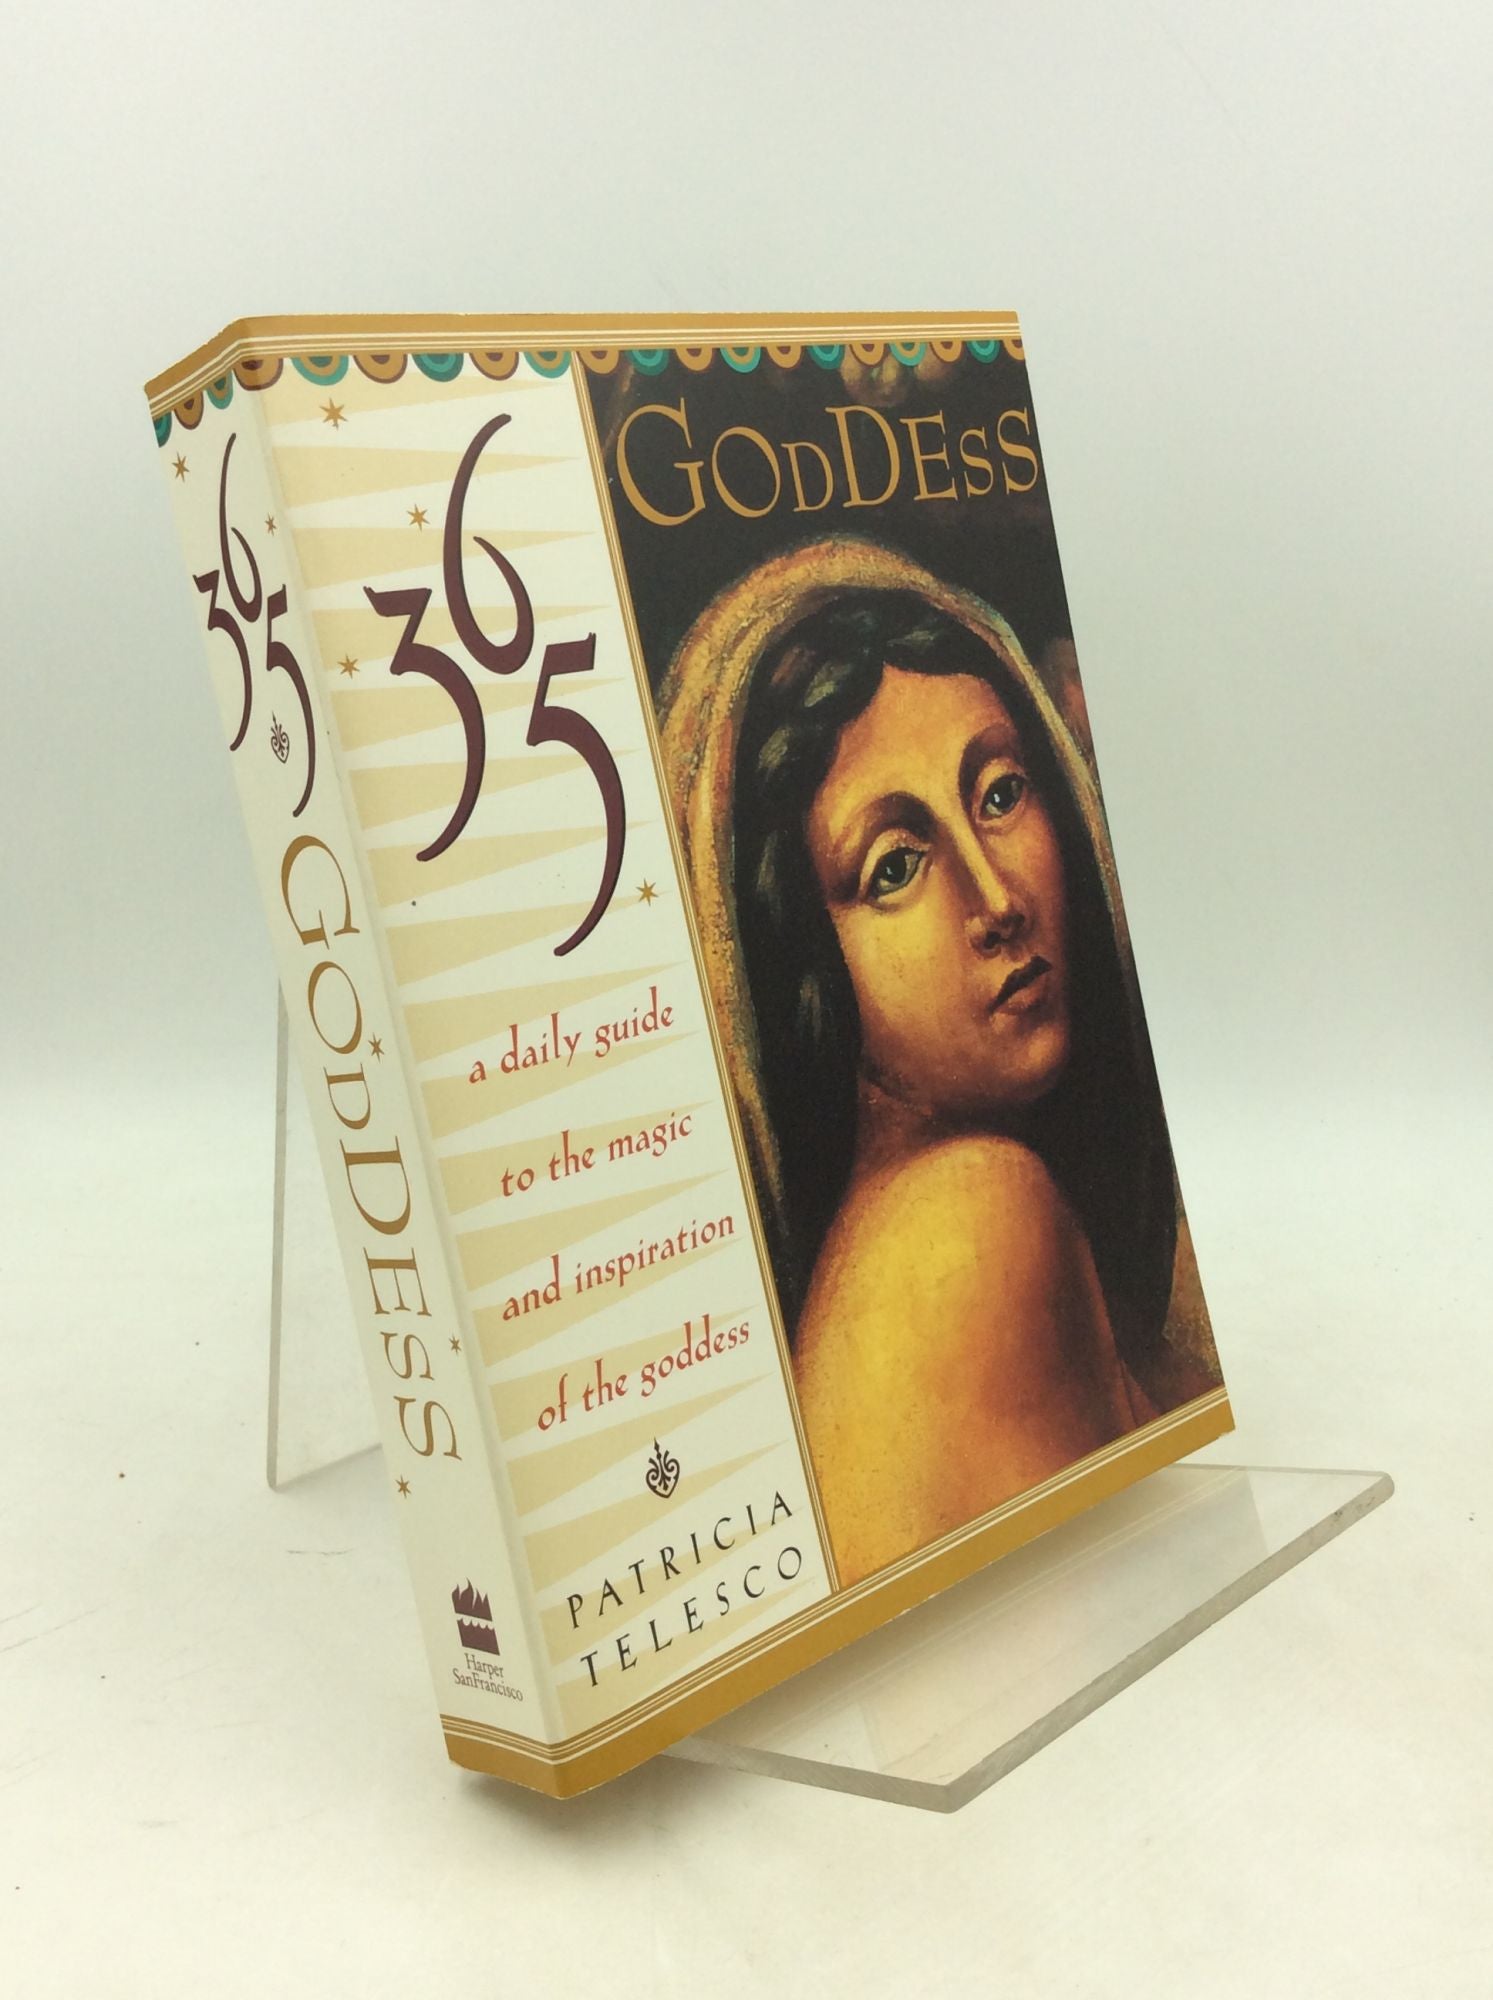 365 GODDESS: A Daily Guide to the Magic and Inspiration of the Goddess, Patricia Telesco